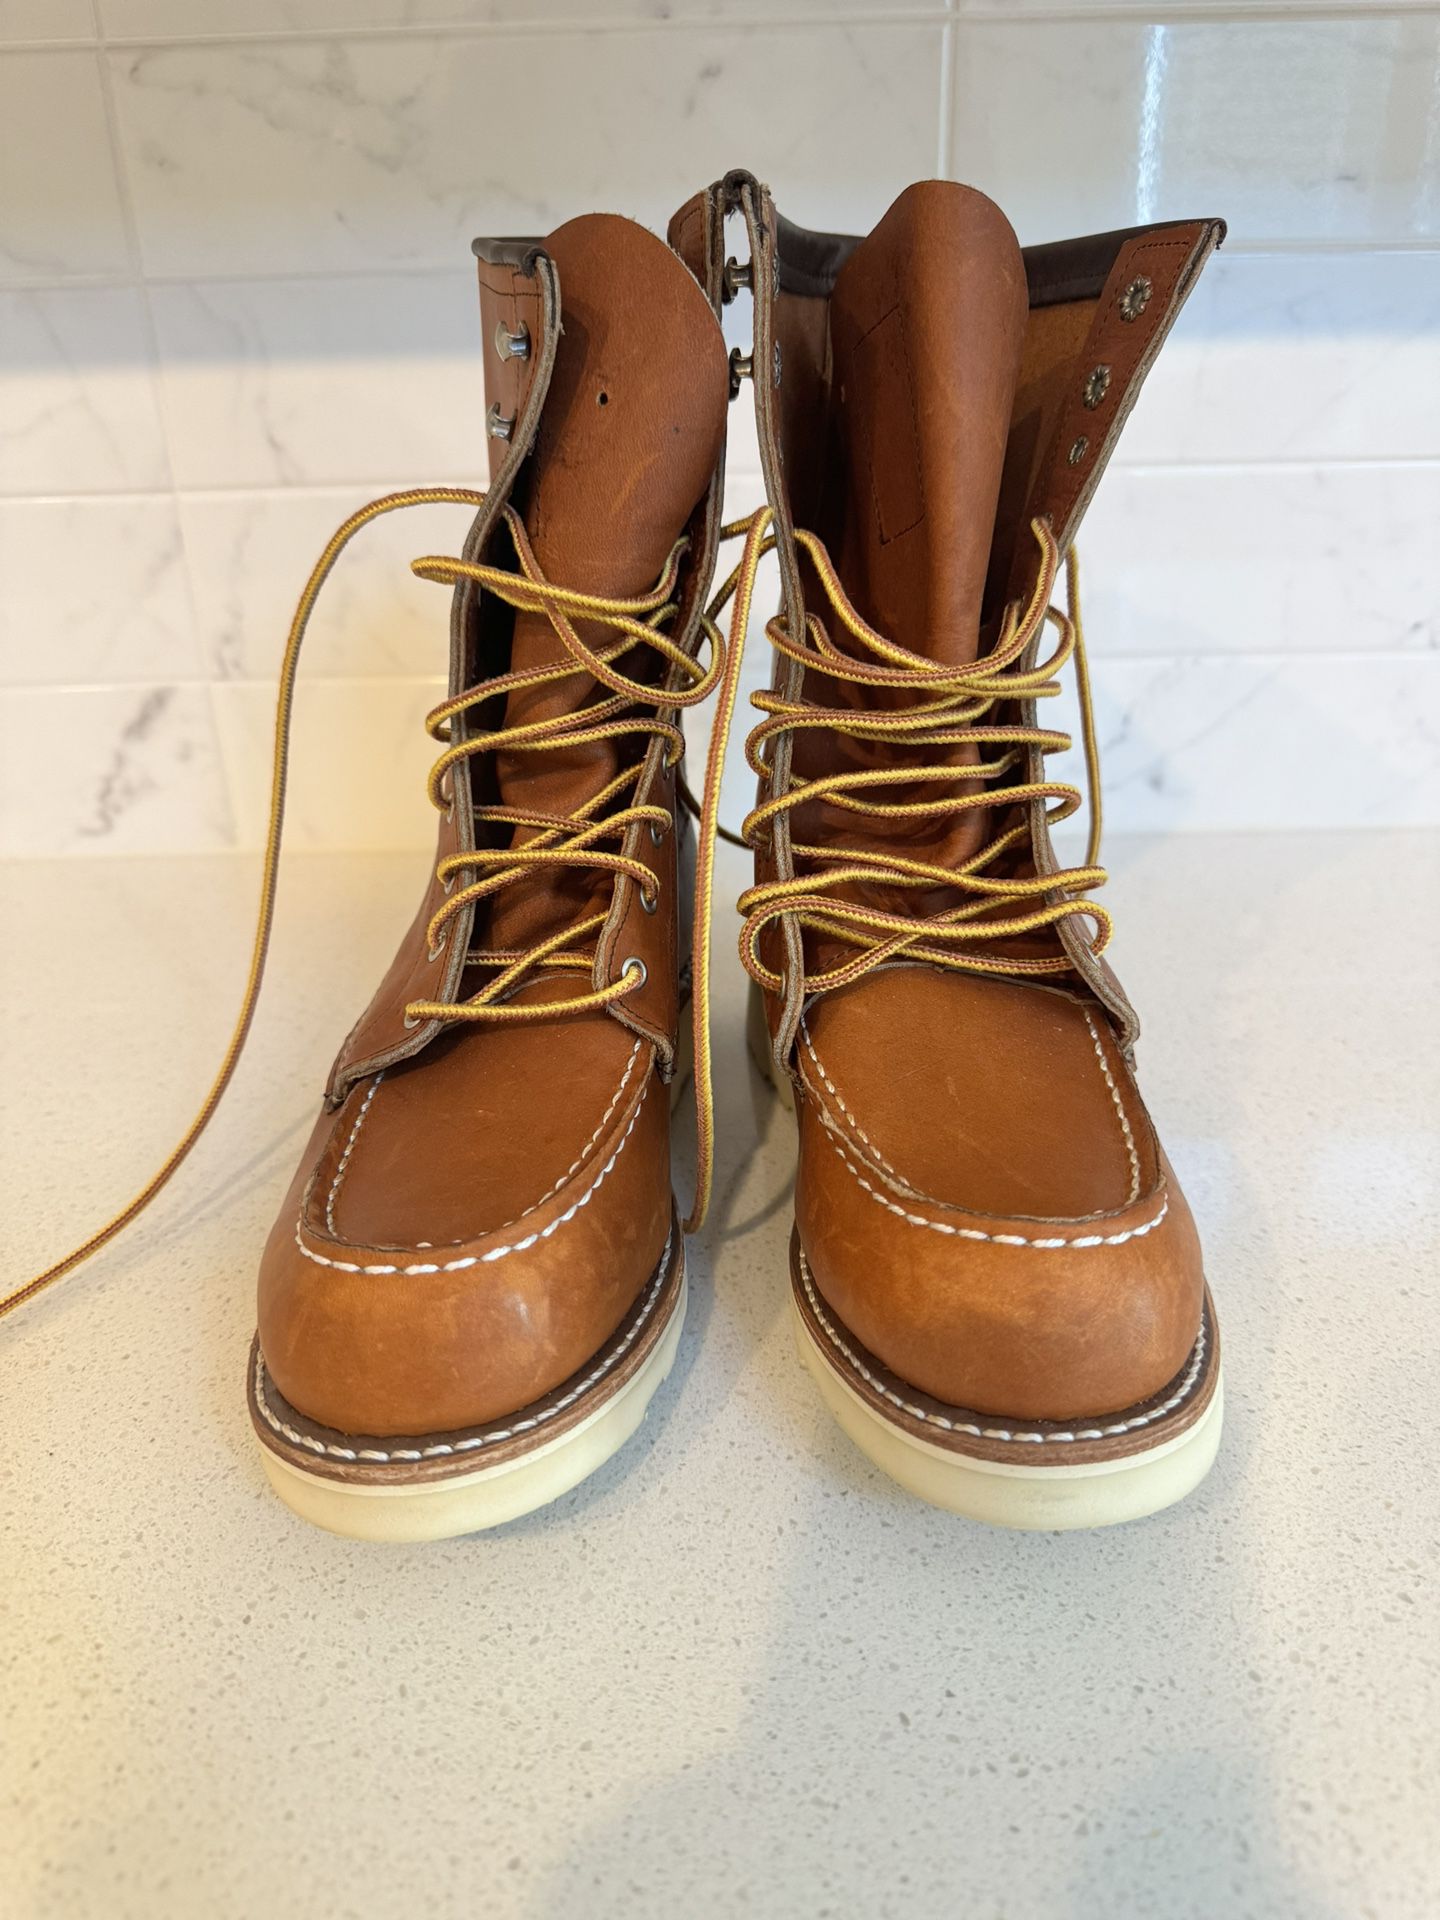 Red Wing Boots 6.5